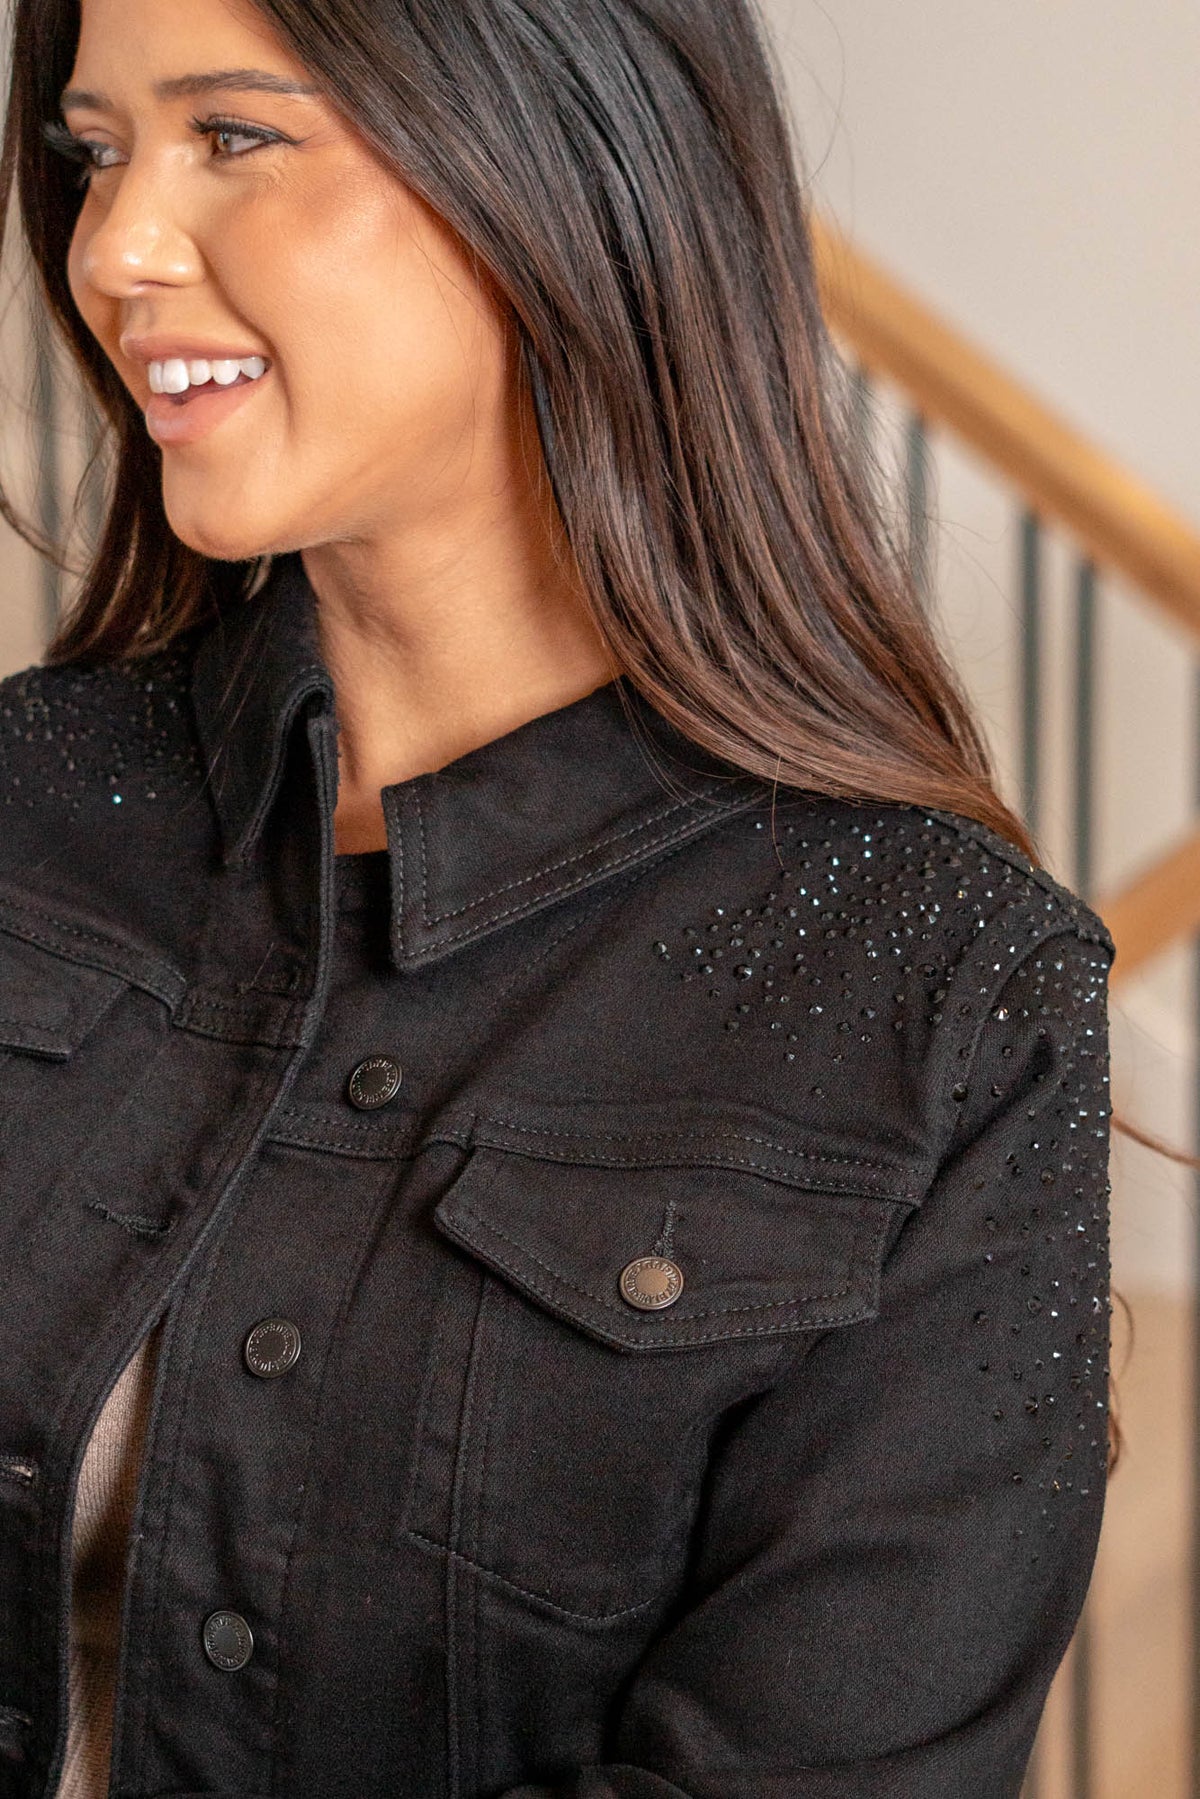 Judy Blue   Sprinkle some charm into your wardrobe with our adorable Rhinestone Delight Jacket in playful black stretchy fabric! This jacket isn't just about looking good; it's about sparkling with joy. The rhinestone detailing adds a touch of magic, making it perfect for adding a dash of cuteness to your outfits. Comfortable and stylish, it's your go-to for turning any day into a whimsical adventure!